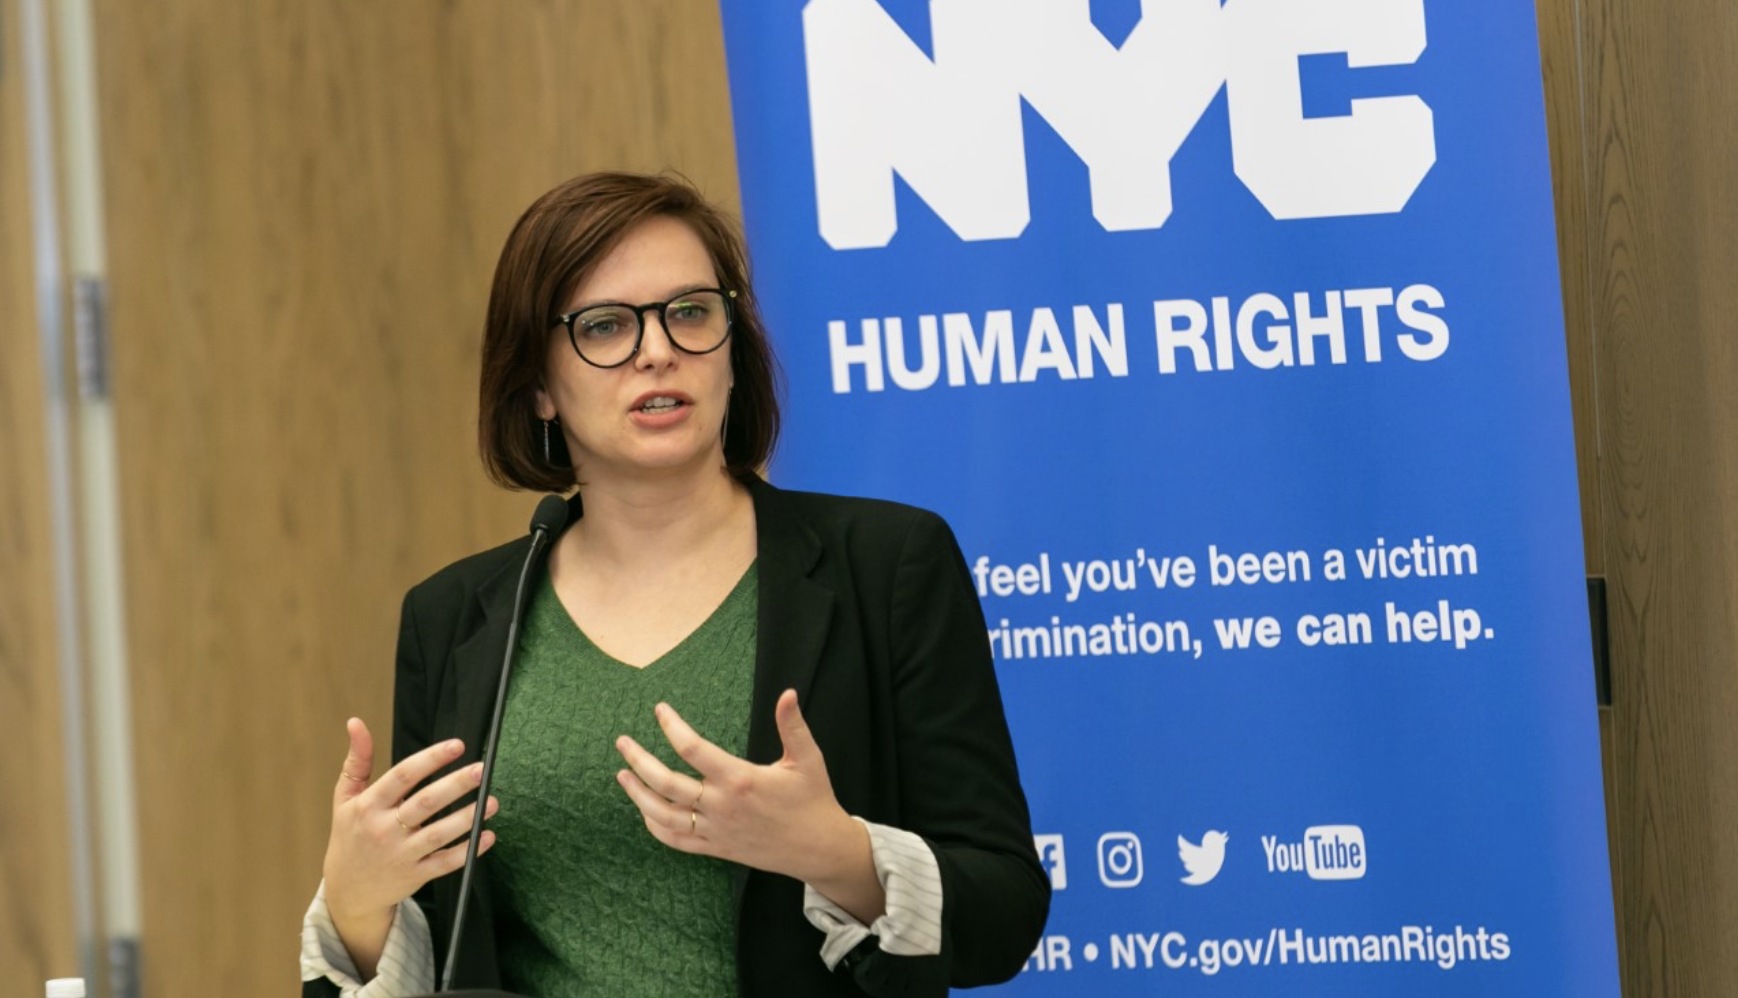 Commission staff member speaking at podium with an NYC Human Rights banner behind her.